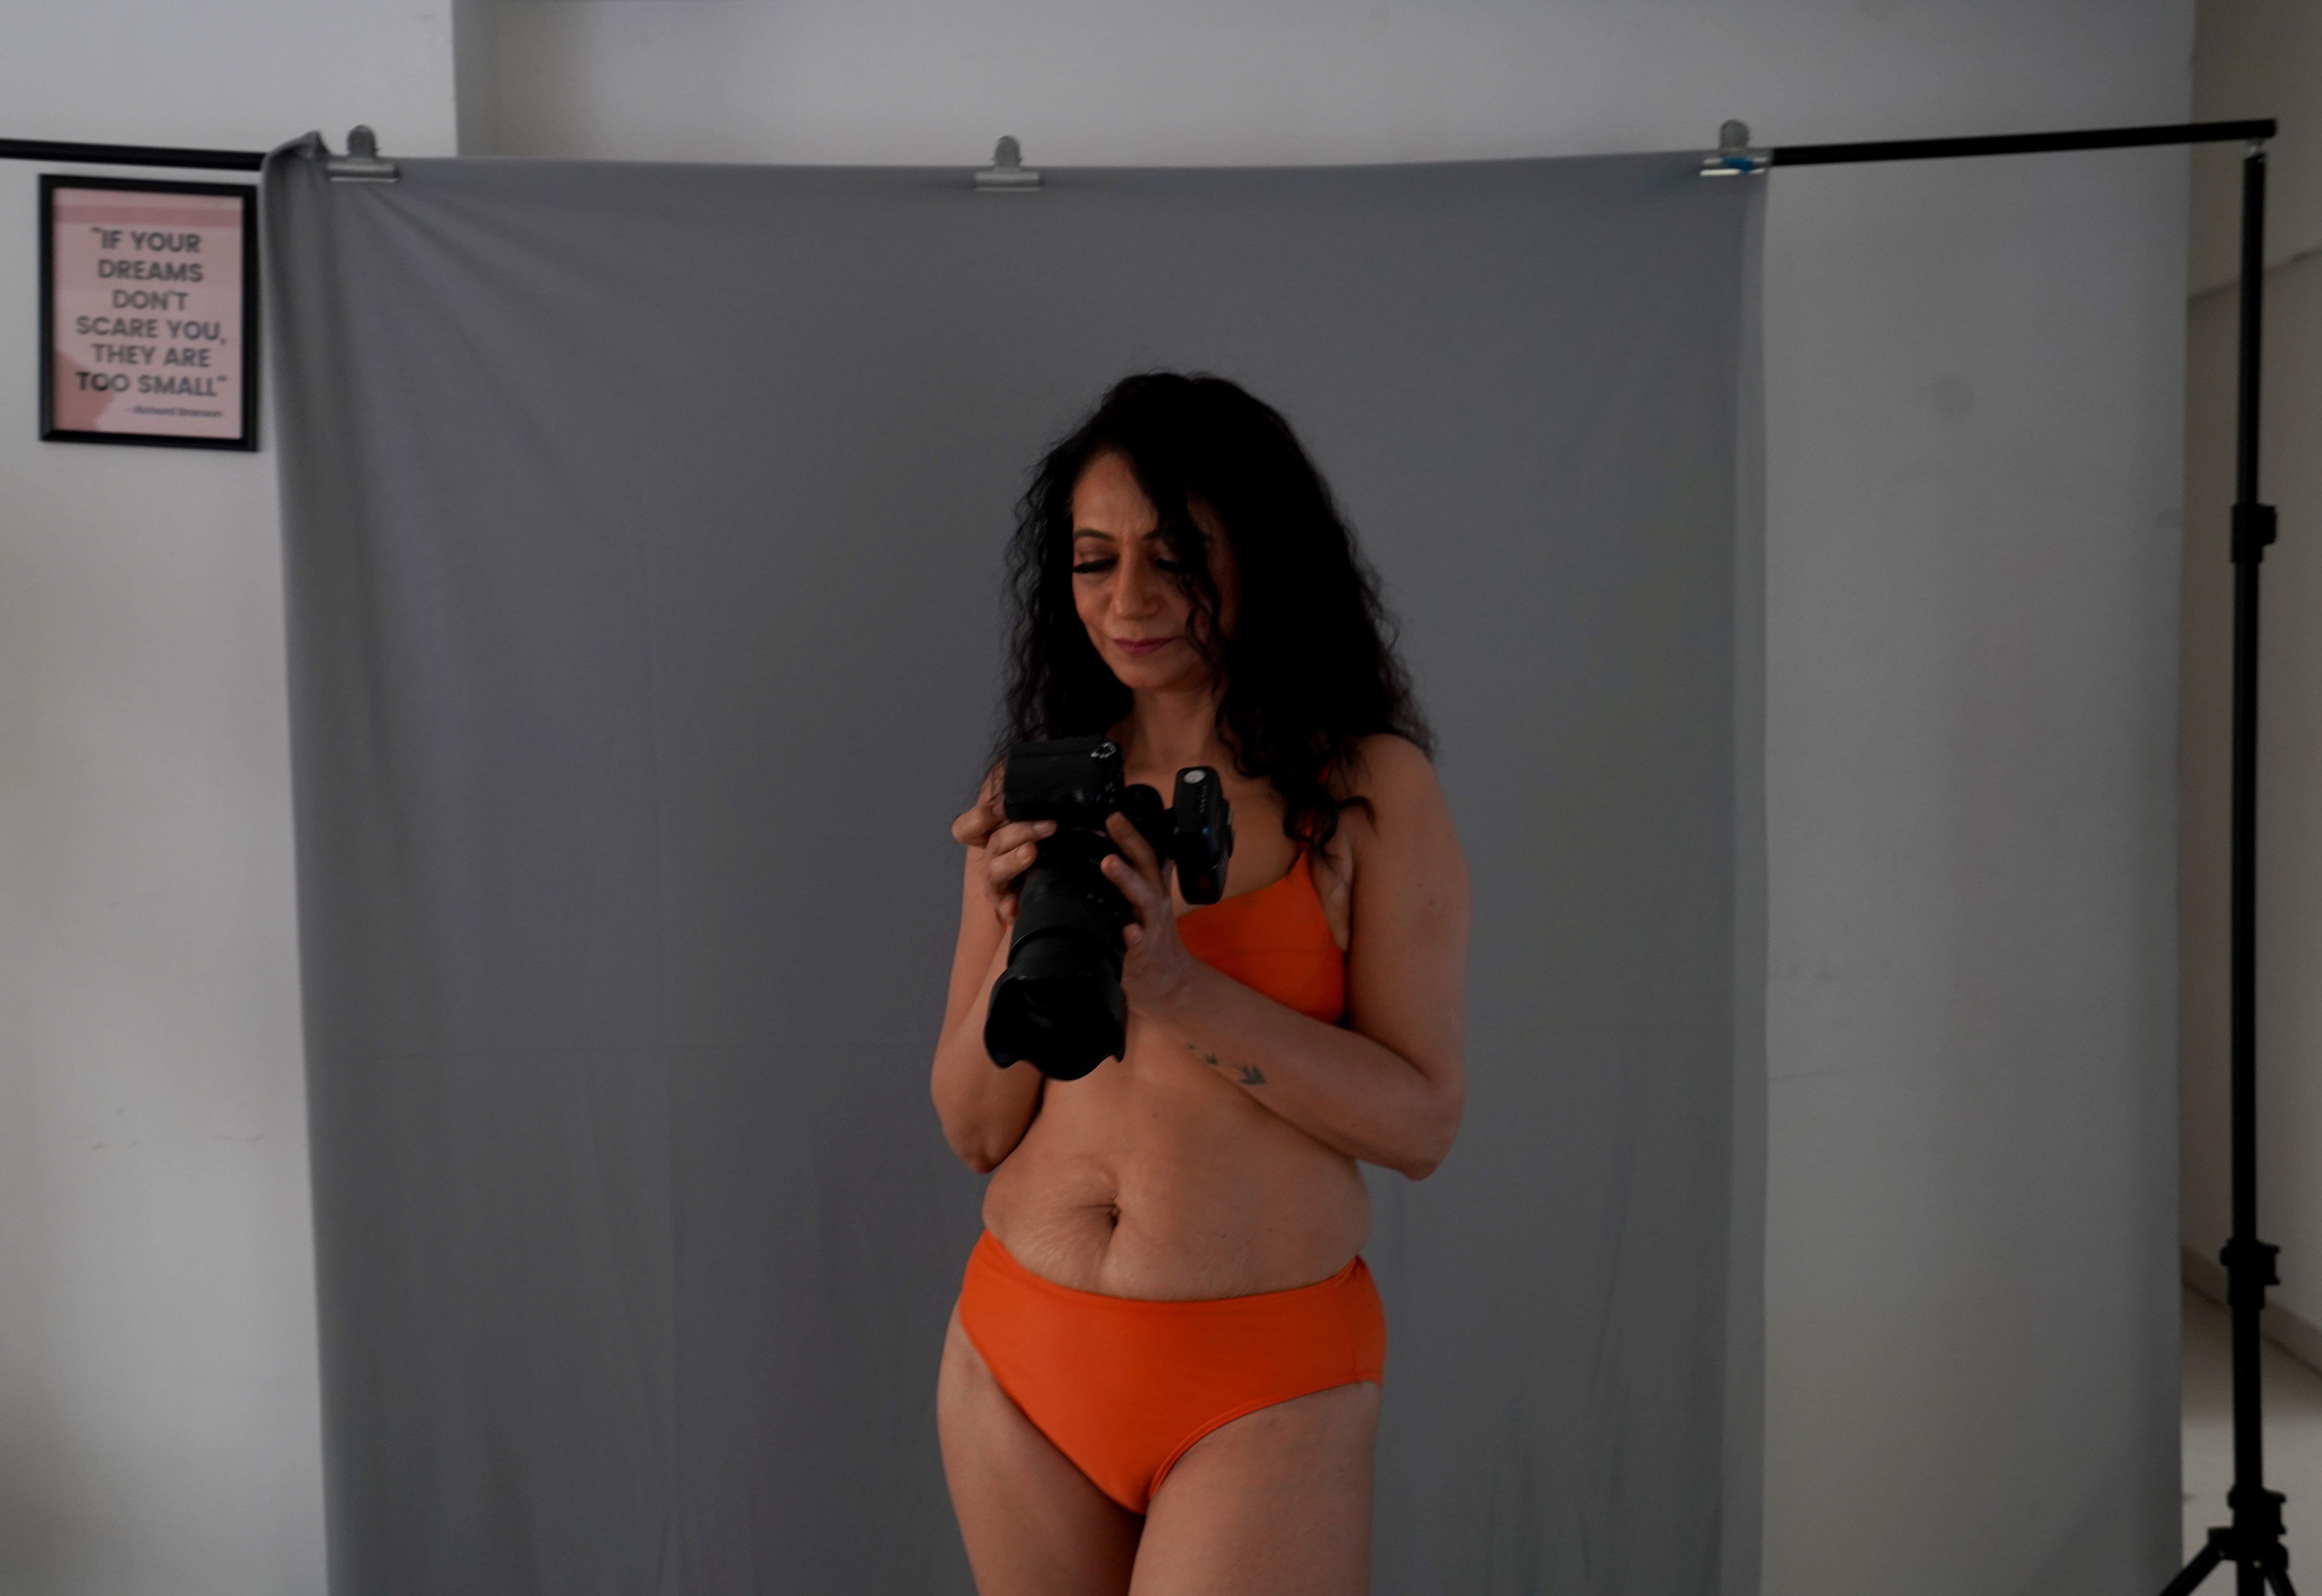 Indian lingerie model, 52, hopes to inspire inclusivity, change Reuters image